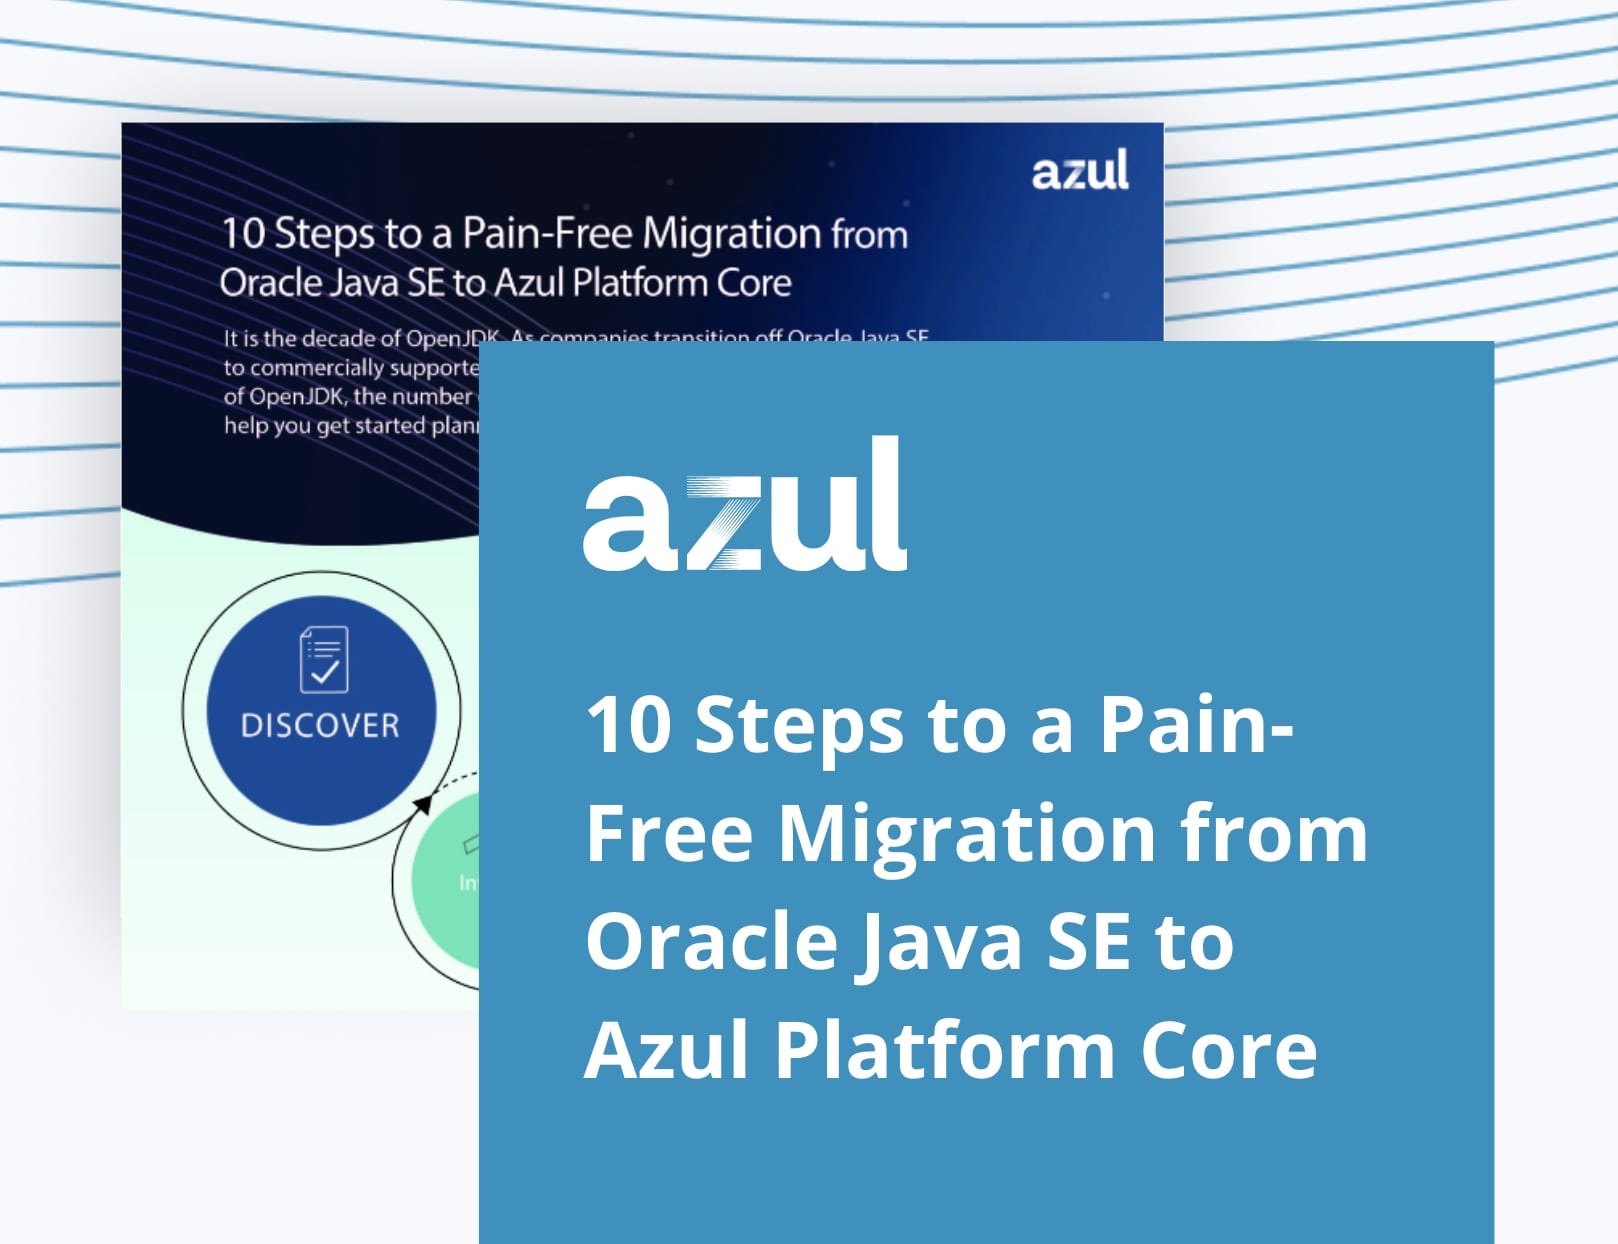 10 Steps to a Pain-Free Migration from Oracle Java to Azul Platform Core